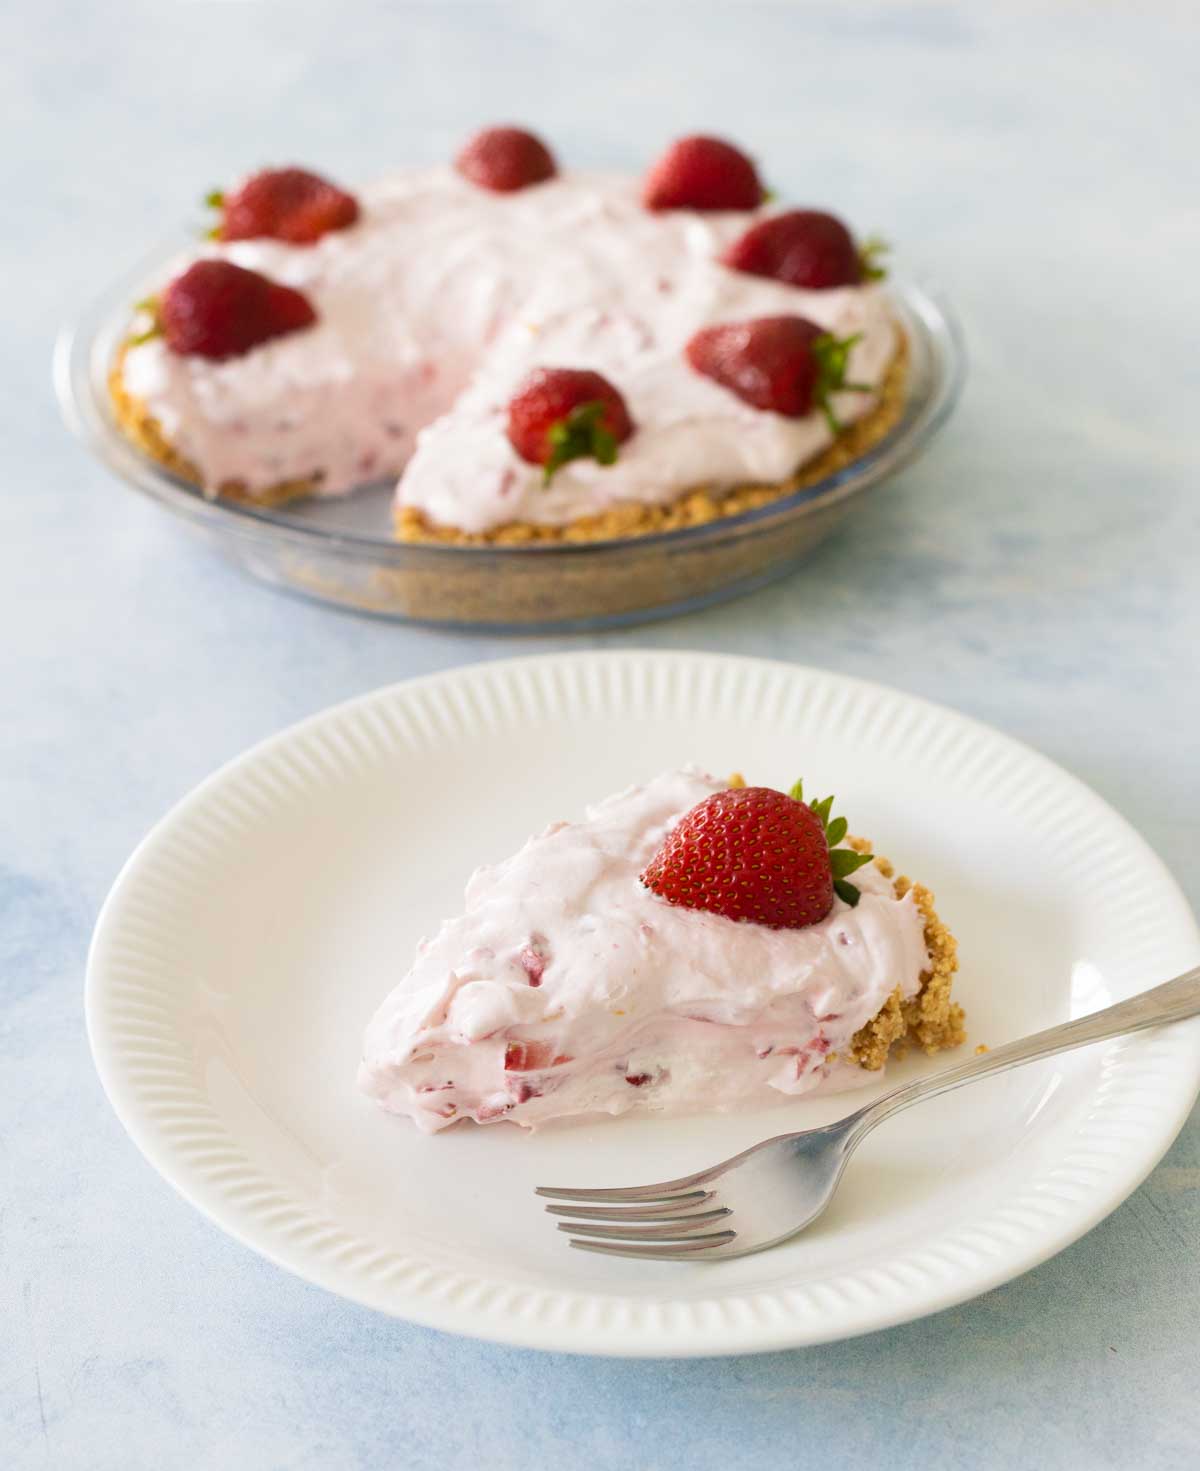 A slice of strawberry cream pie on a plate next to the pie in the background.